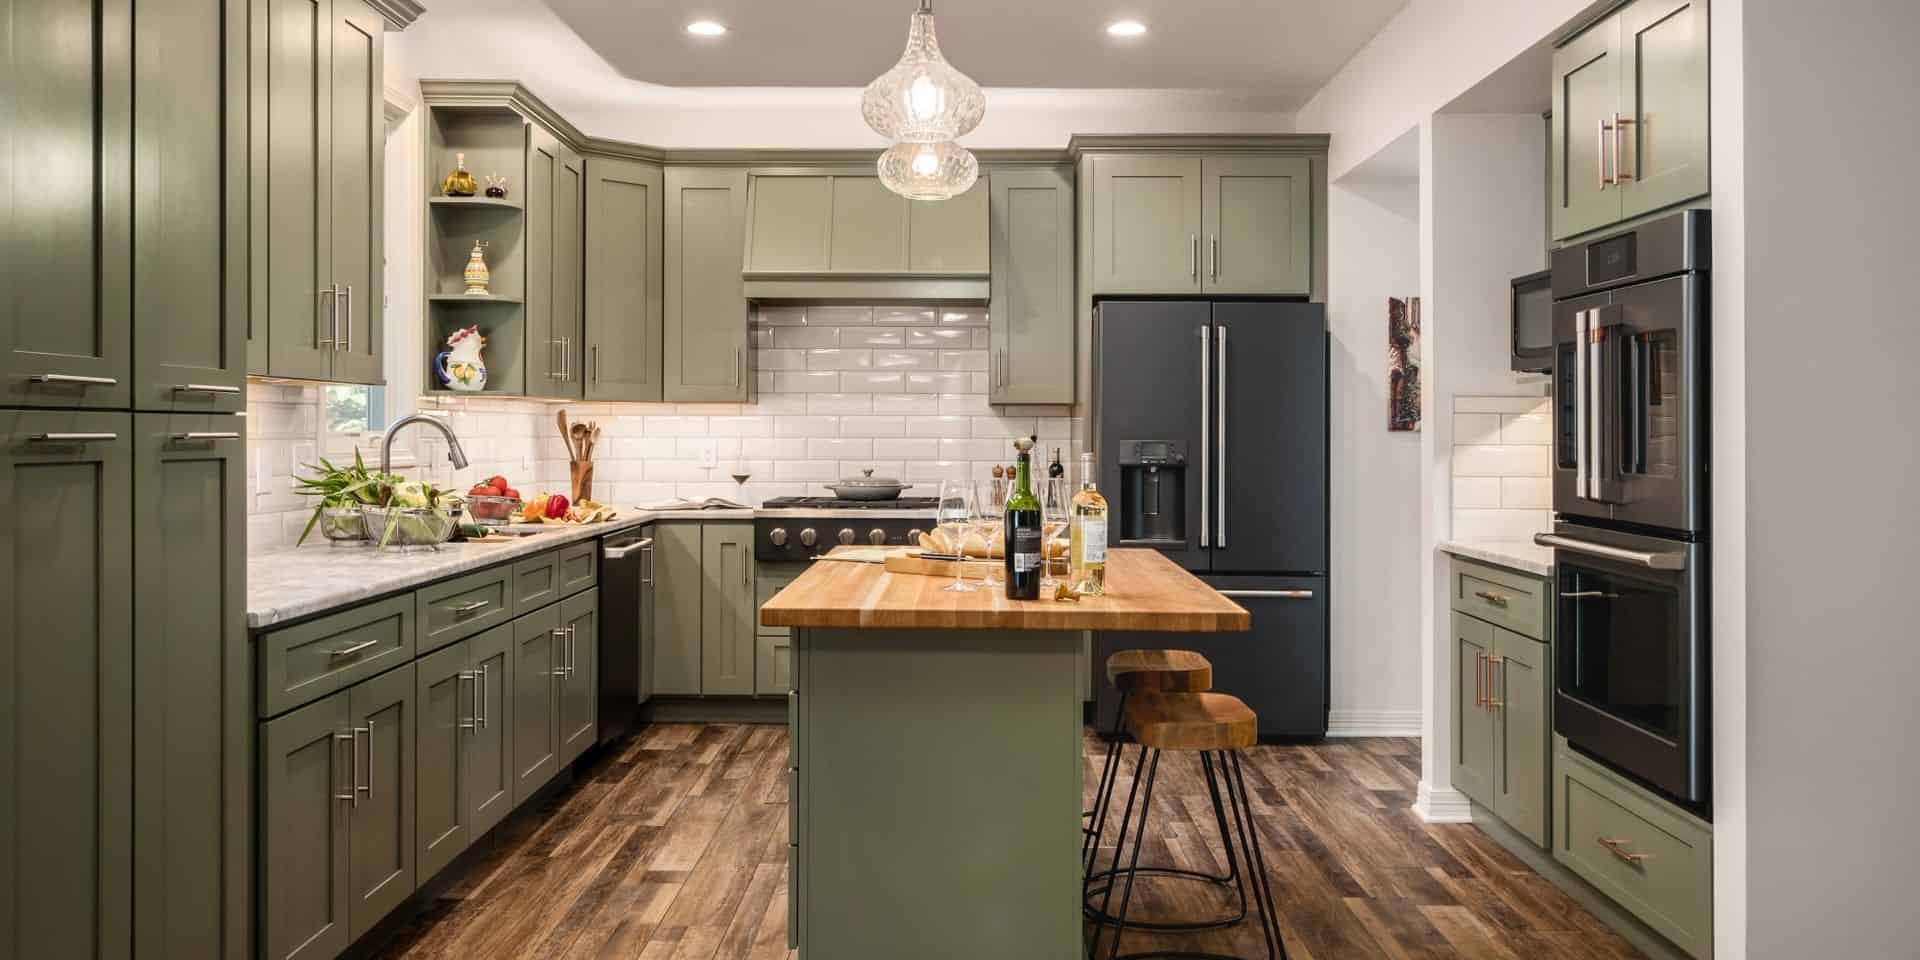 kitchen remodel with upscale green cabinetry and natural tones